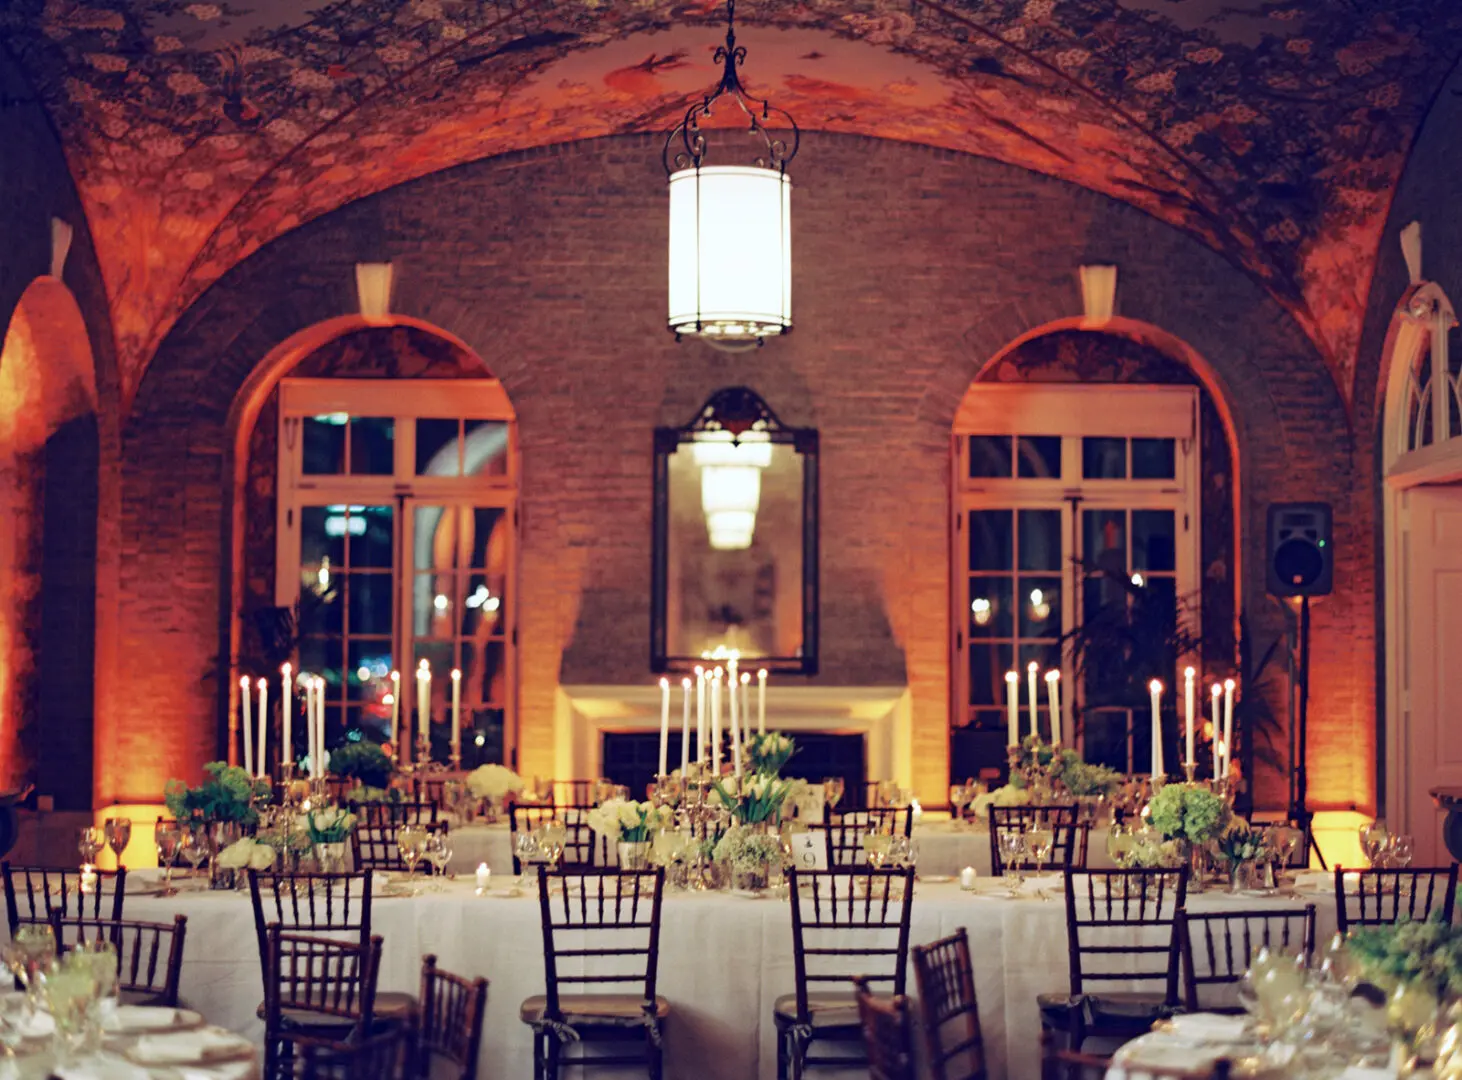 A luxury restaurant with decorated tables